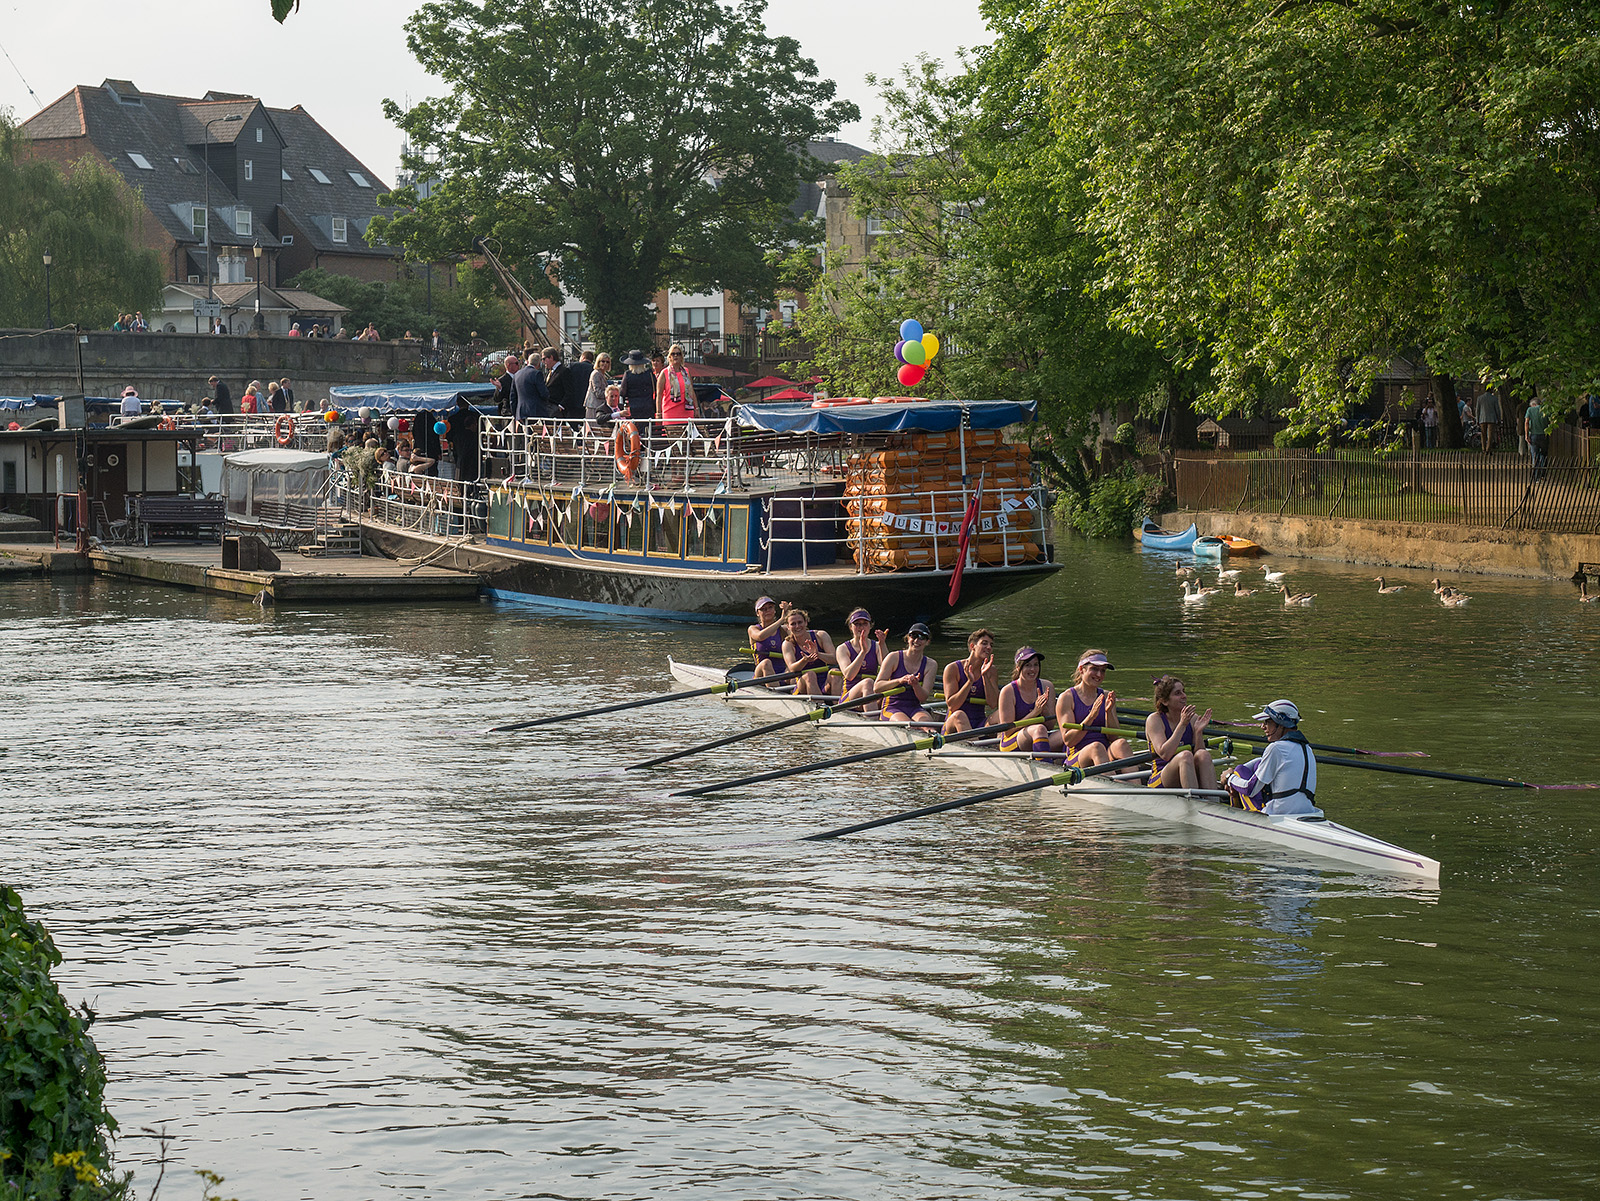 Winners - maintained their position at Head of the River